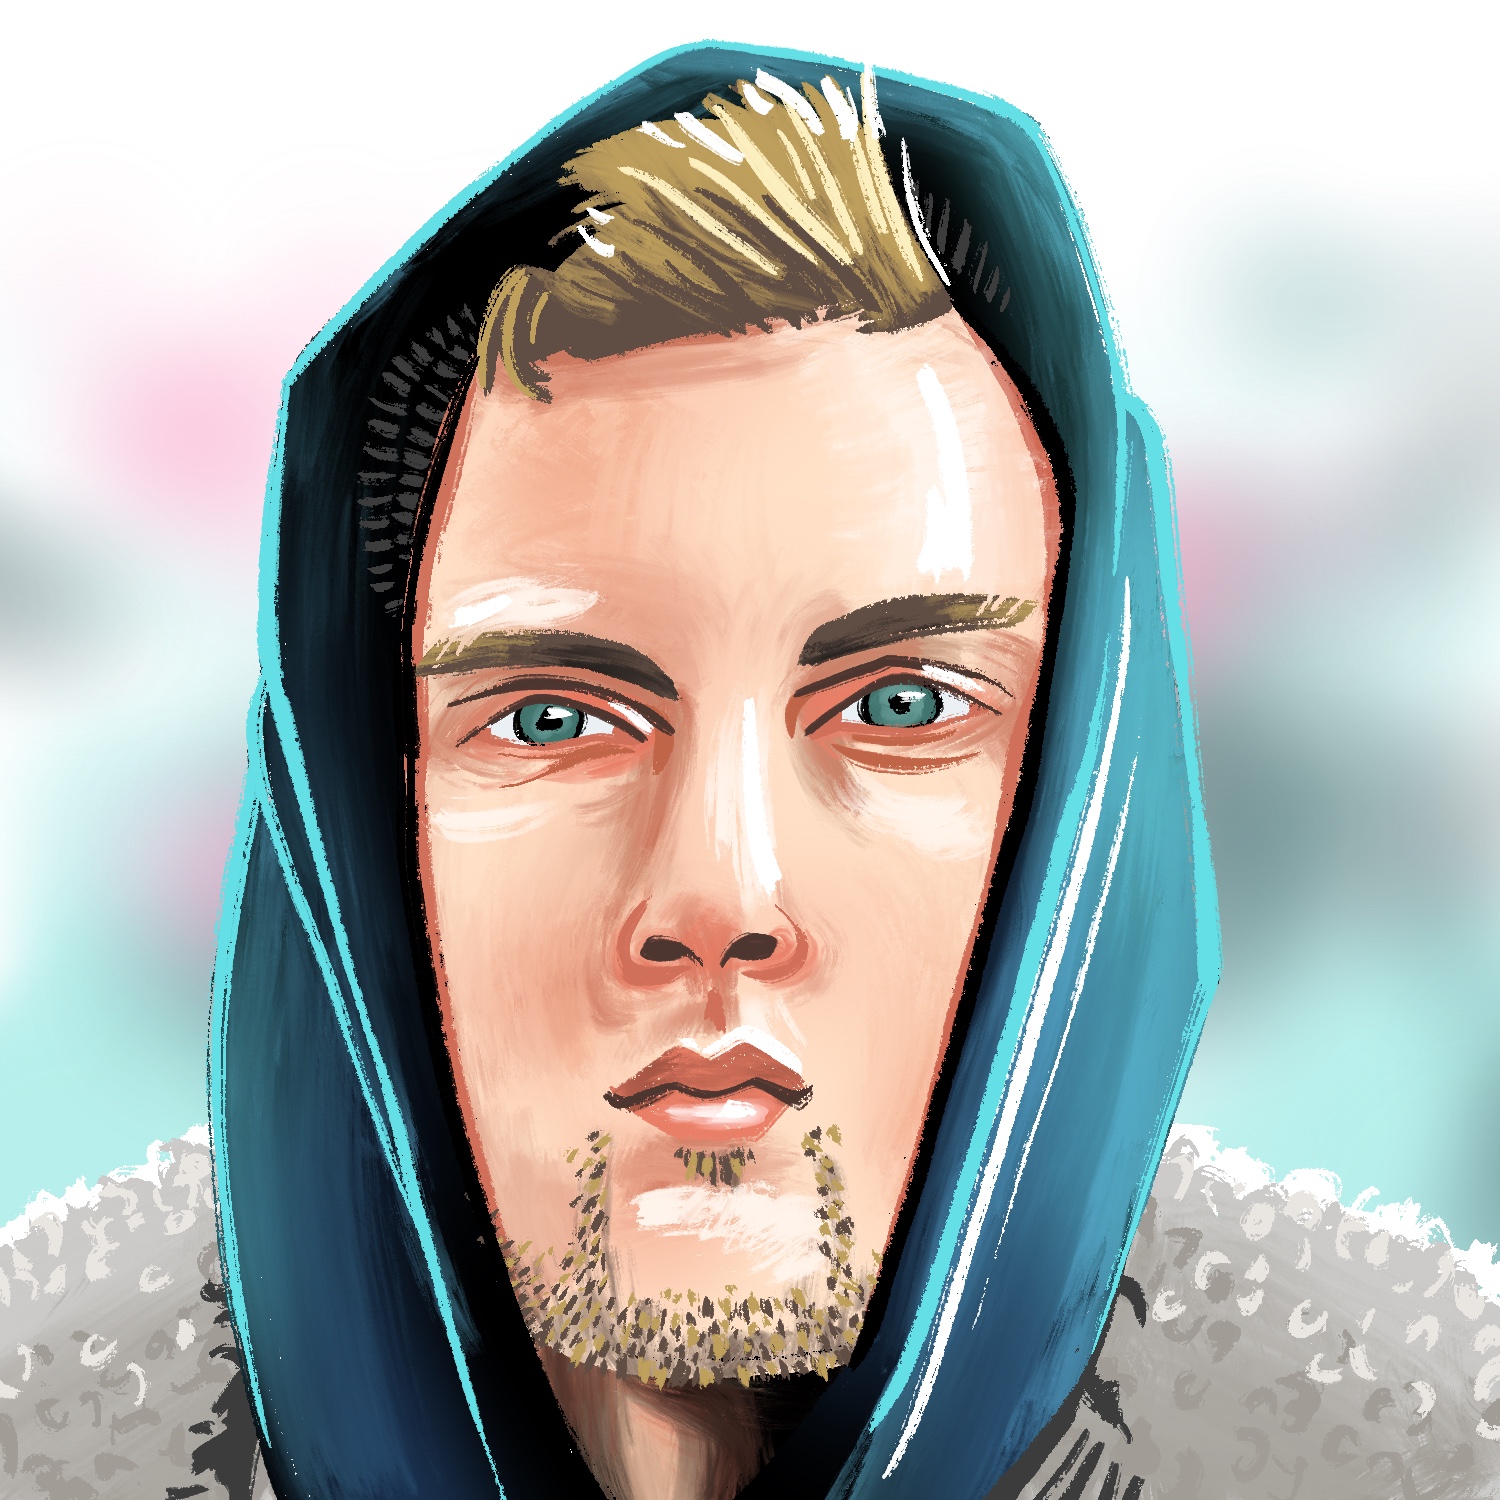 An illustration of a man wearing a dark blue hood, looking at the viewer. The man has a light complexion, blue-green eyes, and a tuft of blond hair sticking out from the opening of the hood. He has a small bit of stubble under his lip and on his chin. The shoulders of his sweatshirt are wool. The background color is a cold mix of light blue and some pink. The drawing is done in a painted, slightly stylized way.